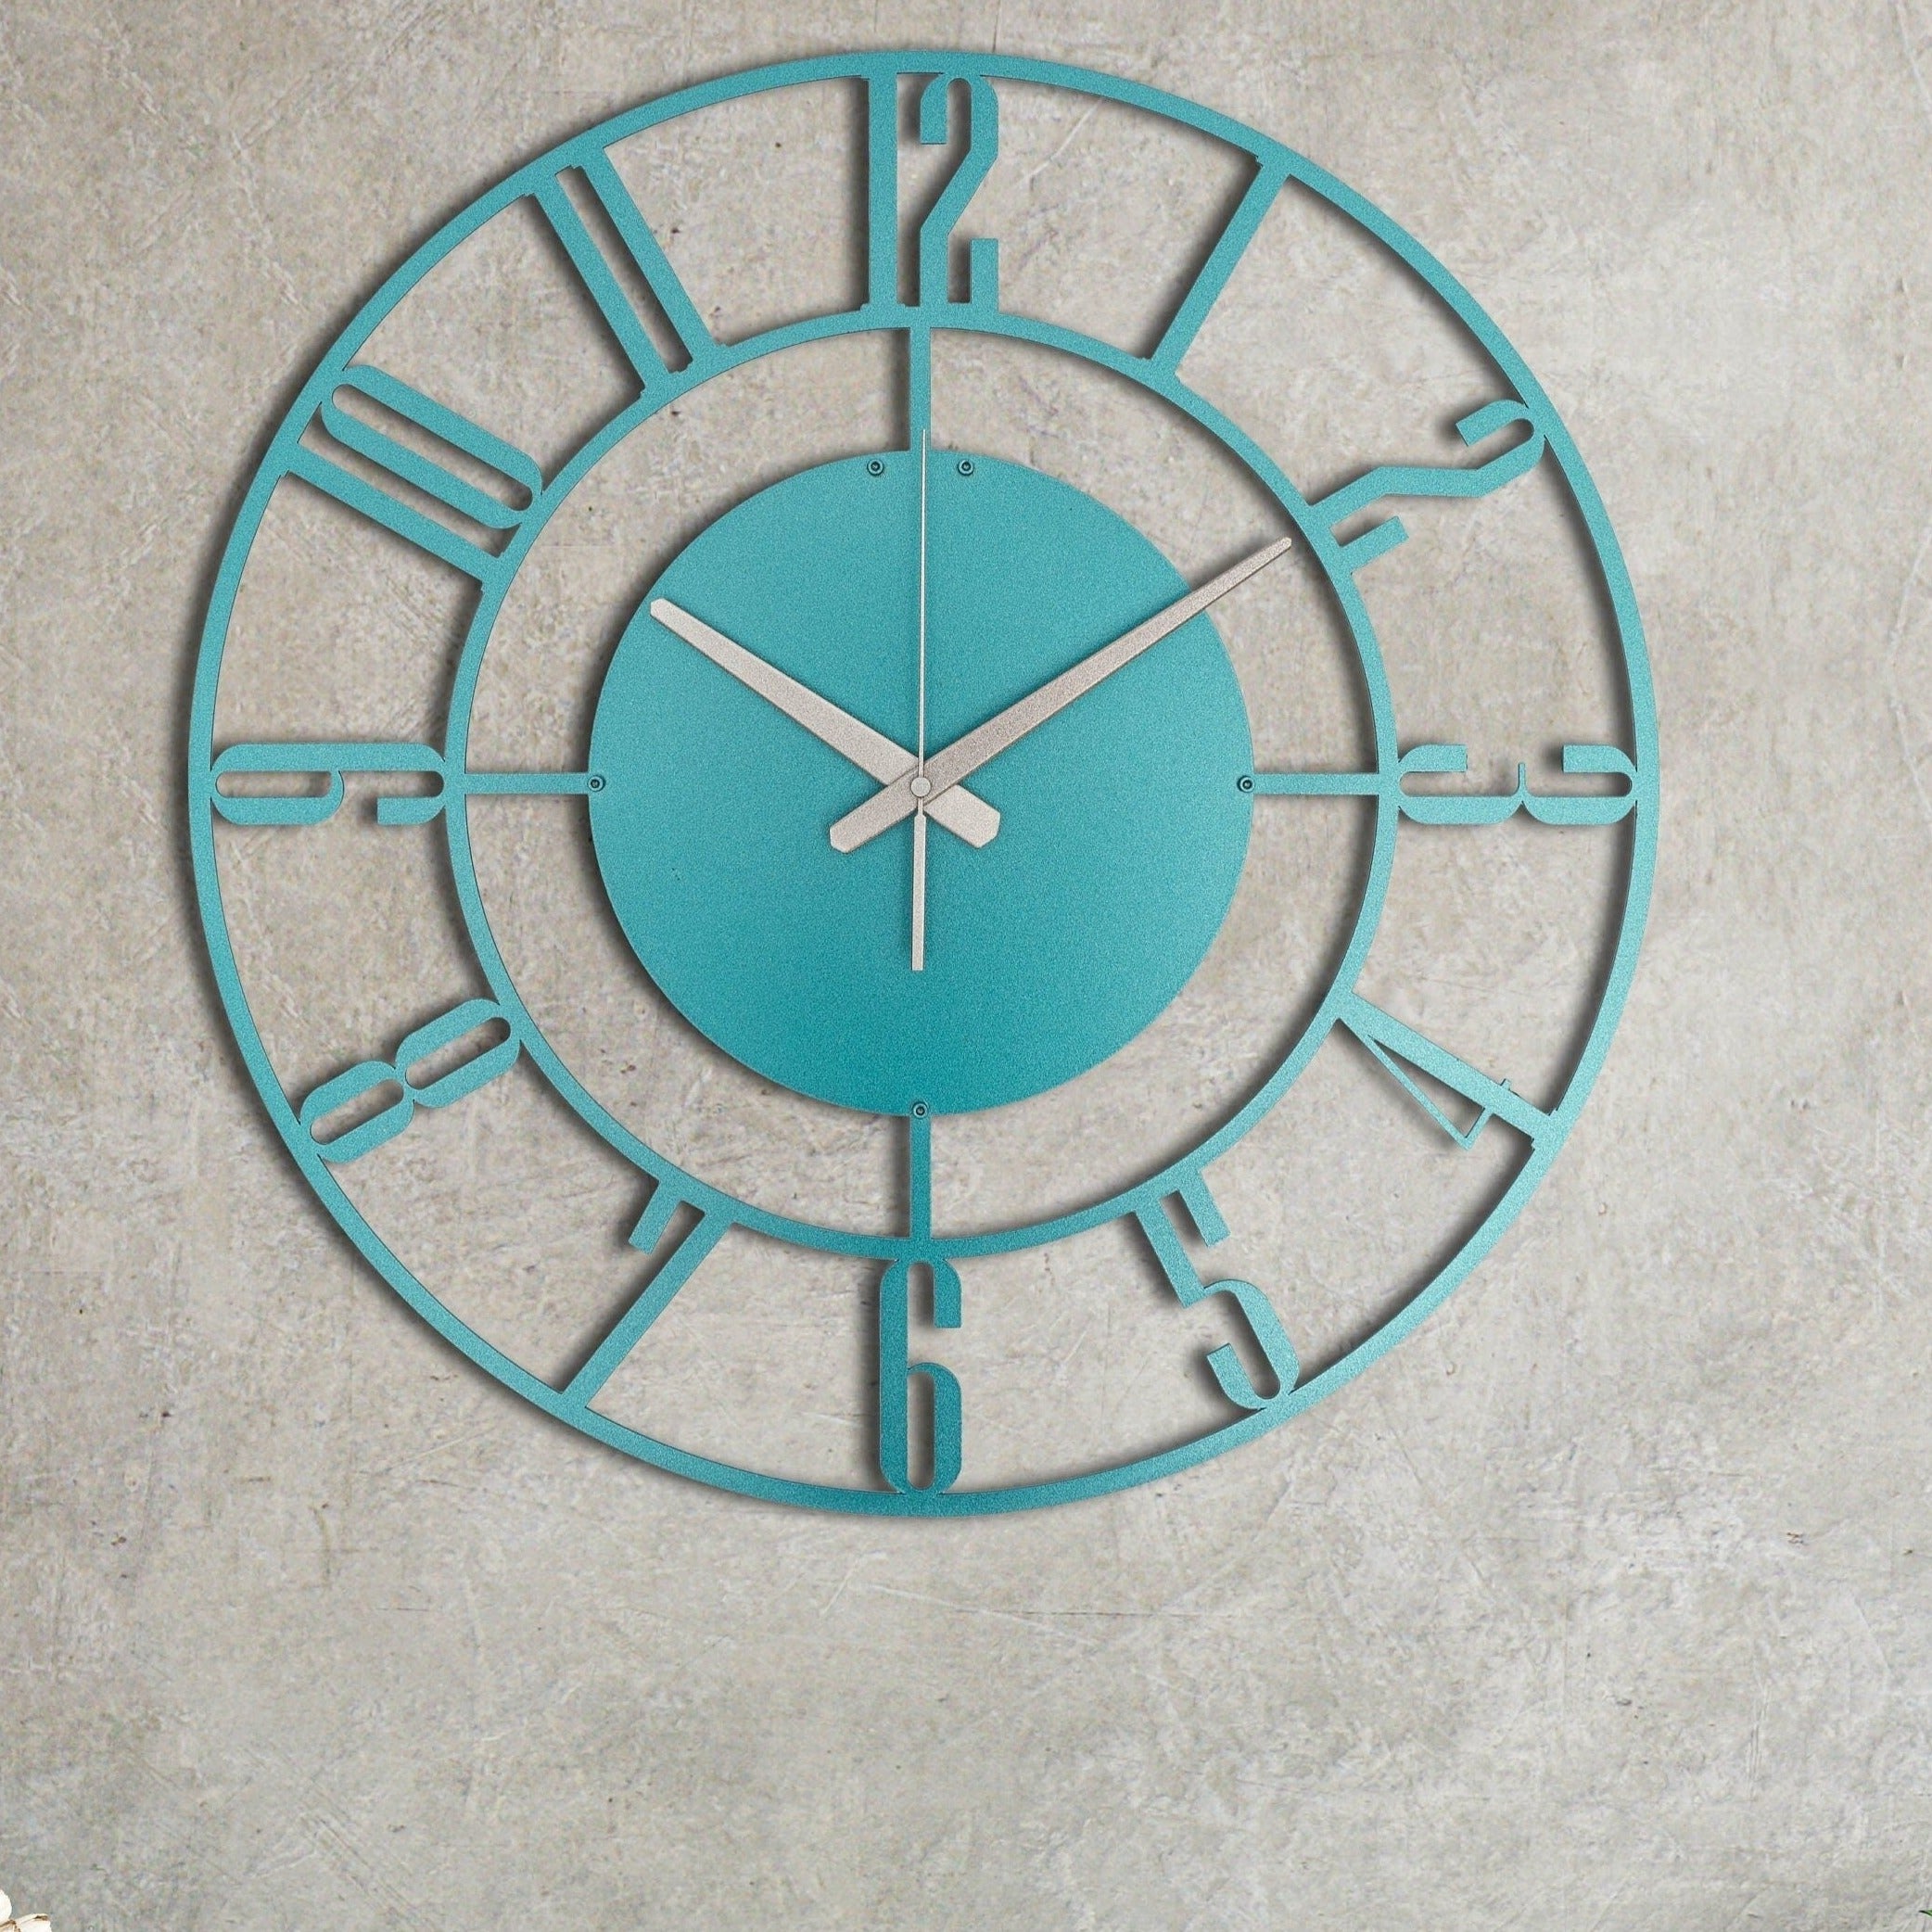 Blue Wall Clock, Large Turquoise Blue Clock, Small Wall Clock, Metal Wall Clock, Oversized Wall Clock, Unique Wall Clock, Clocks For Wall